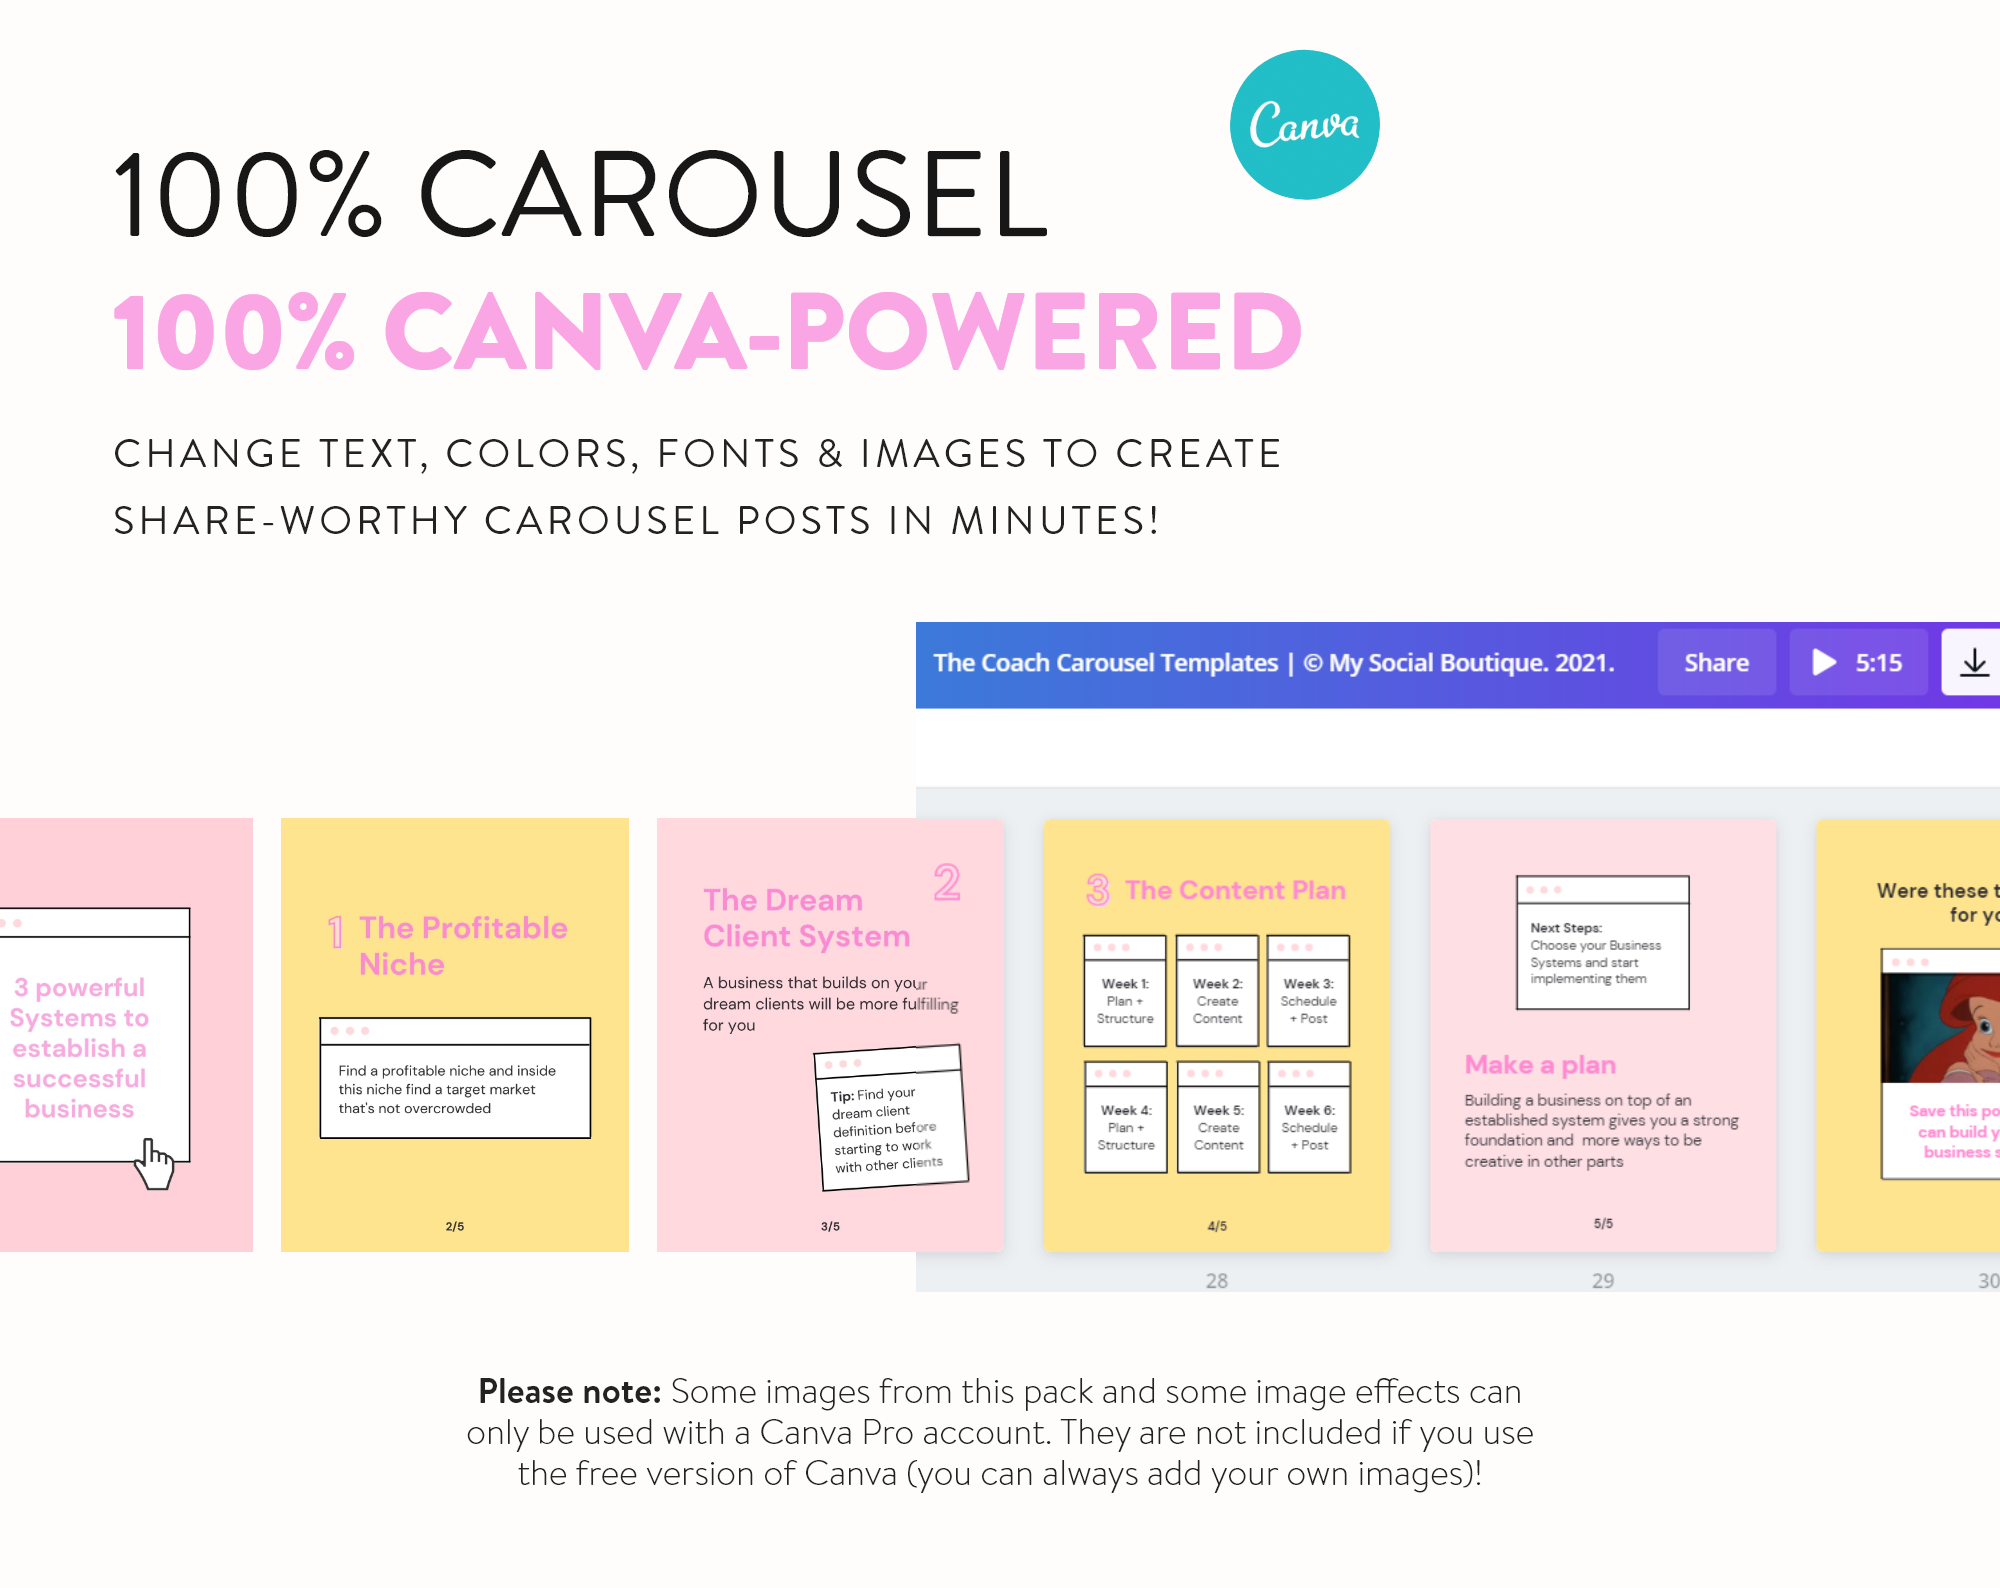 Coach-carousel-Instagram-post-templates-canva-how-it-works